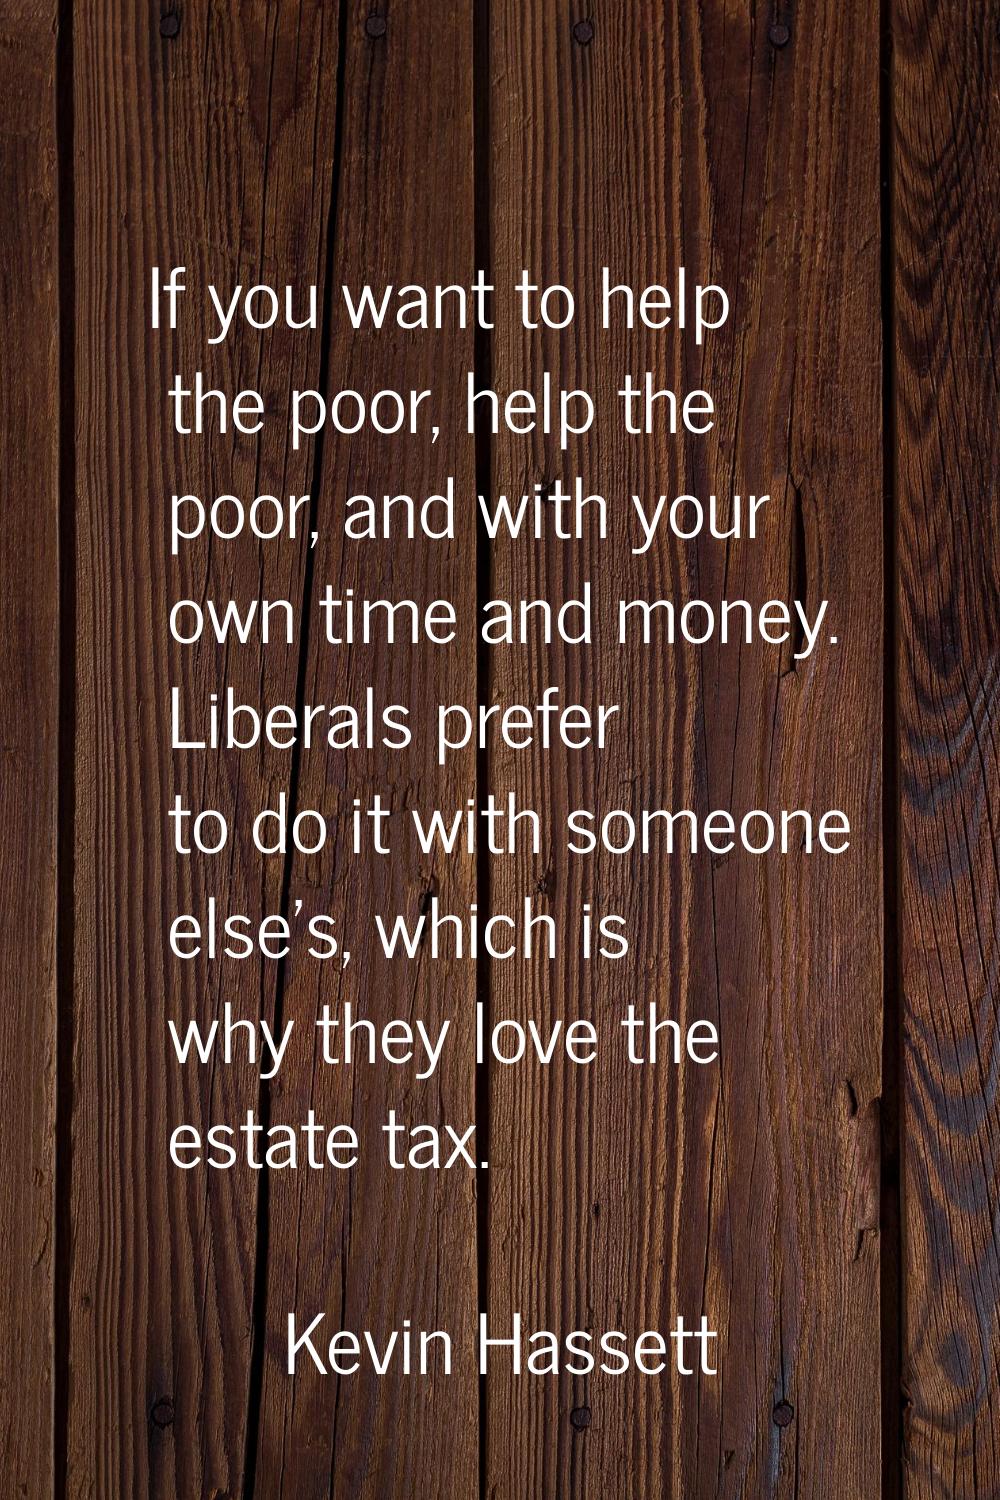 If you want to help the poor, help the poor, and with your own time and money. Liberals prefer to d